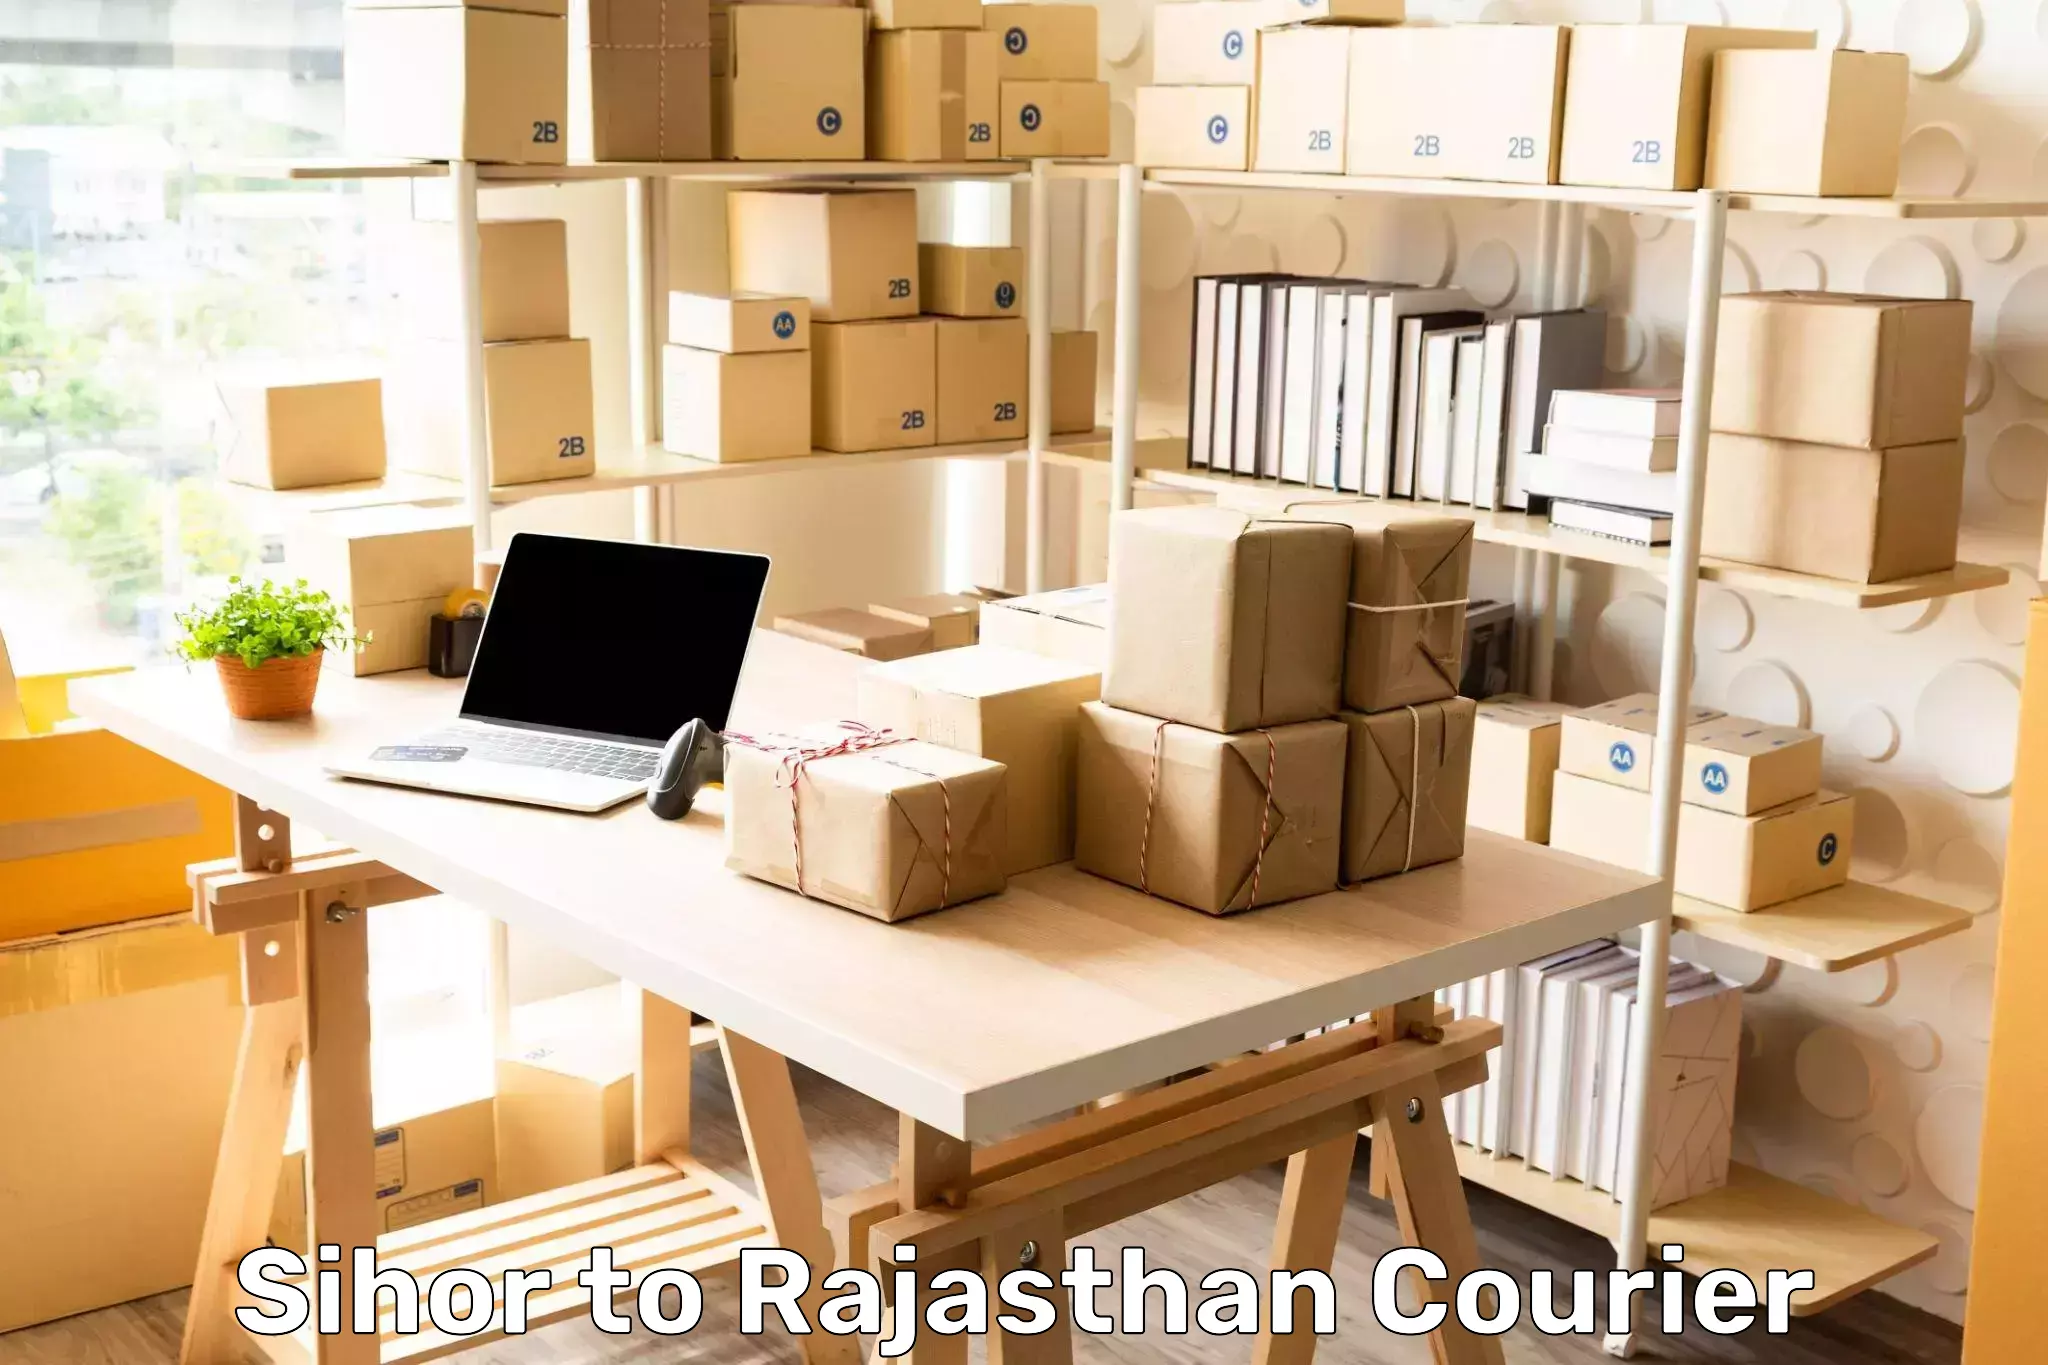 Parcel handling and care in Sihor to Rajasthan